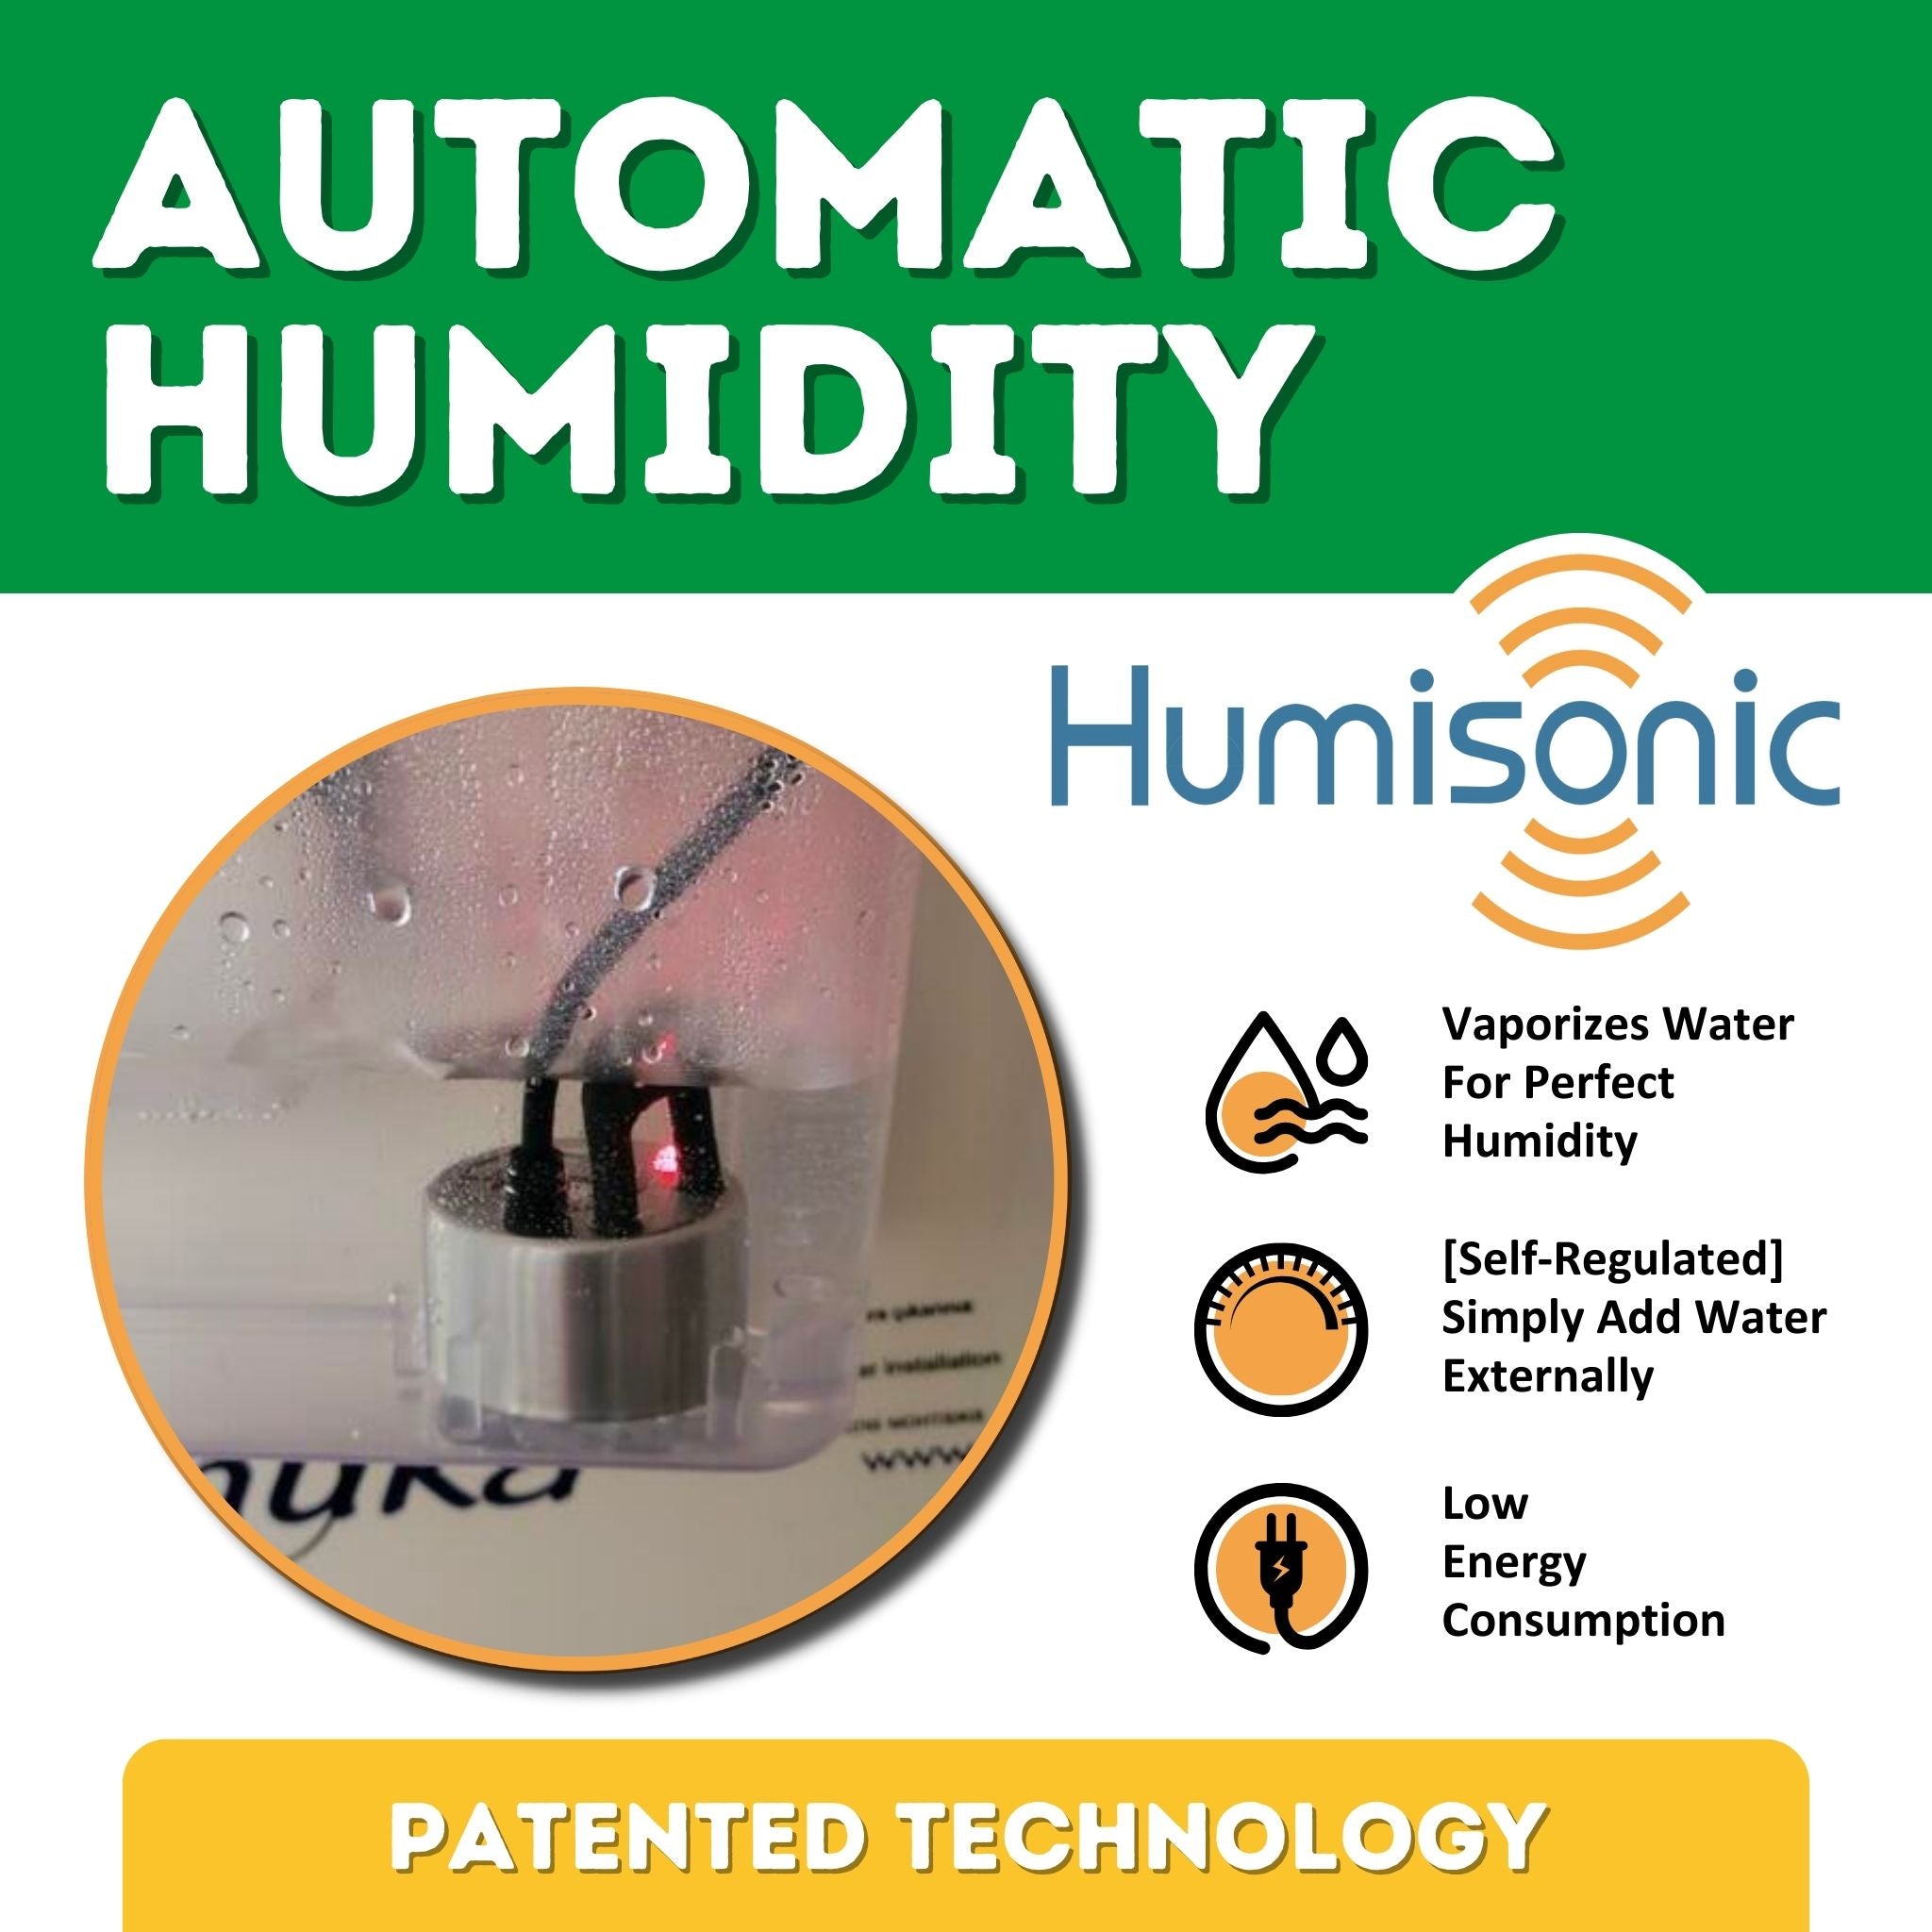 Hatching Time Cimuka. Automatic Humisonic Humidifier is shown in image. Infographic shows patented technology for perfectly controlling humidity in incubator.